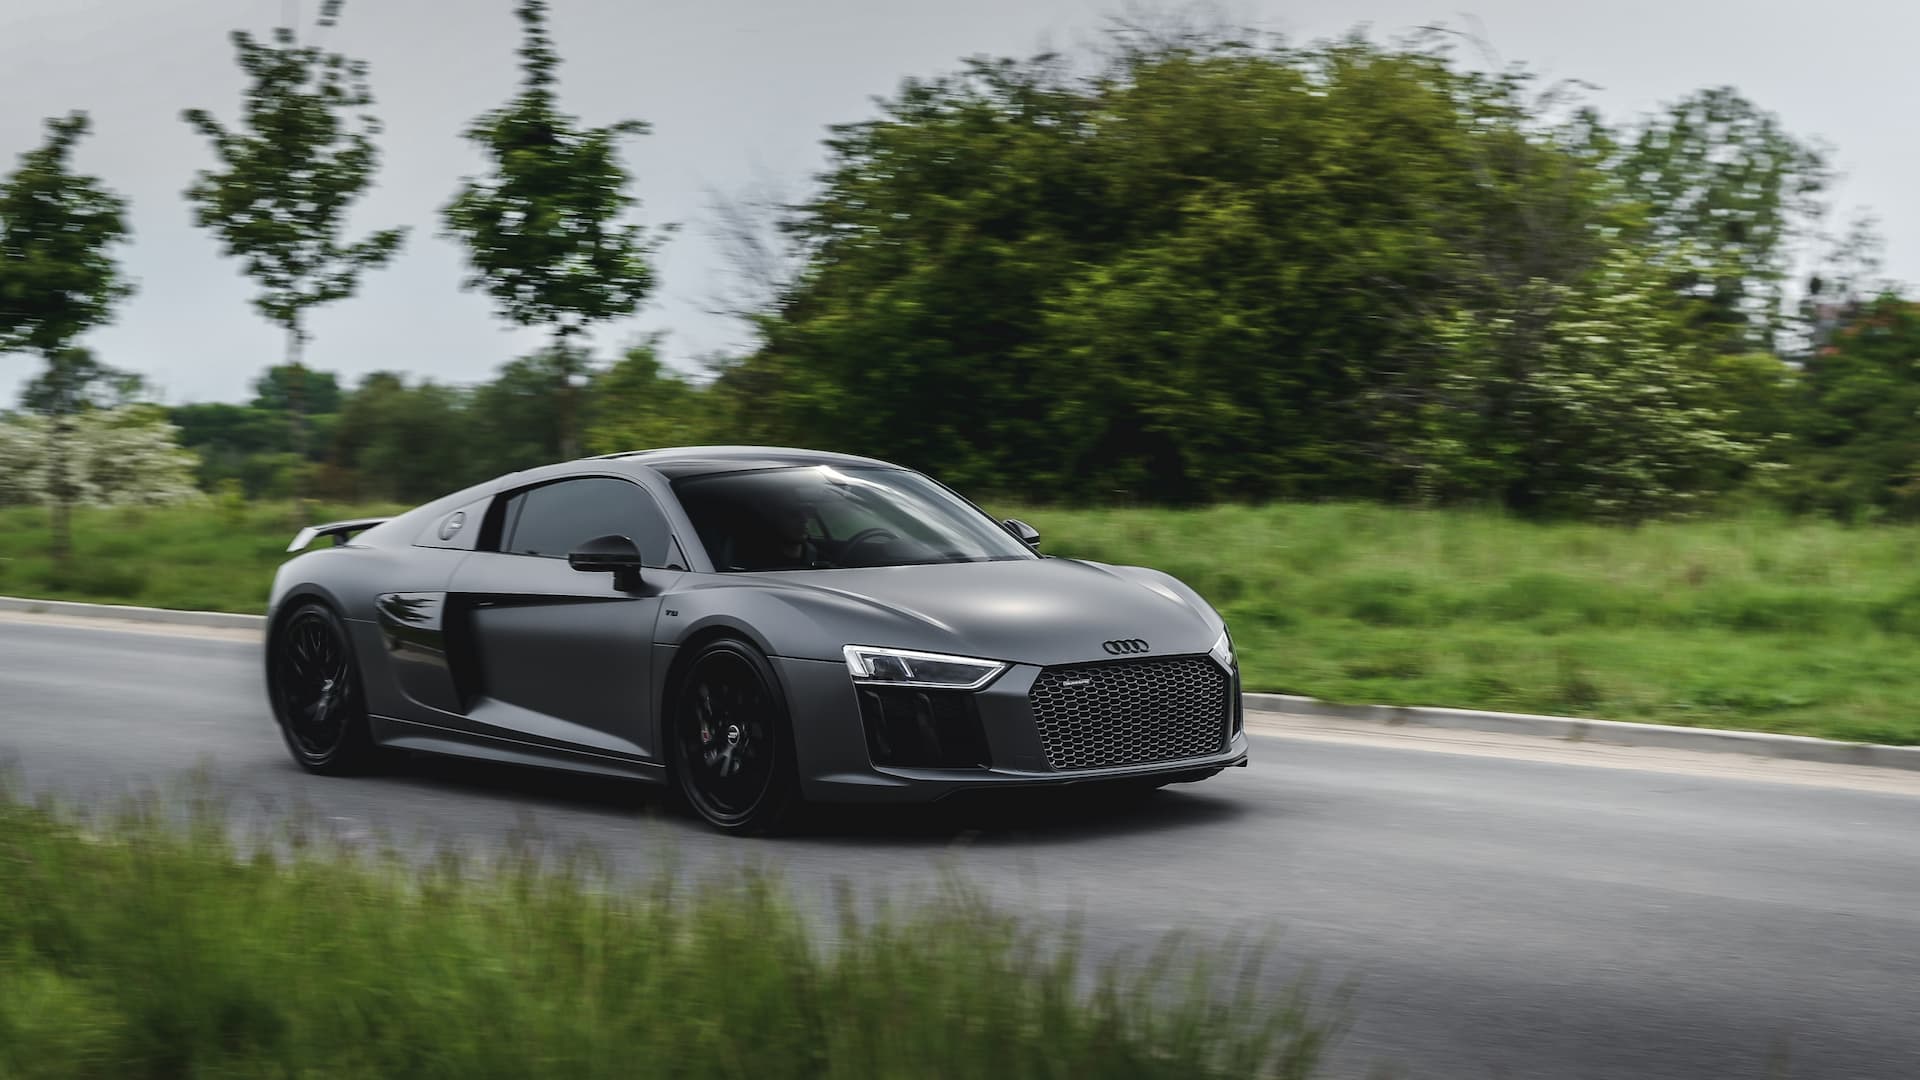 A matt Grey Audi R8 with tinted windows driving on a country road